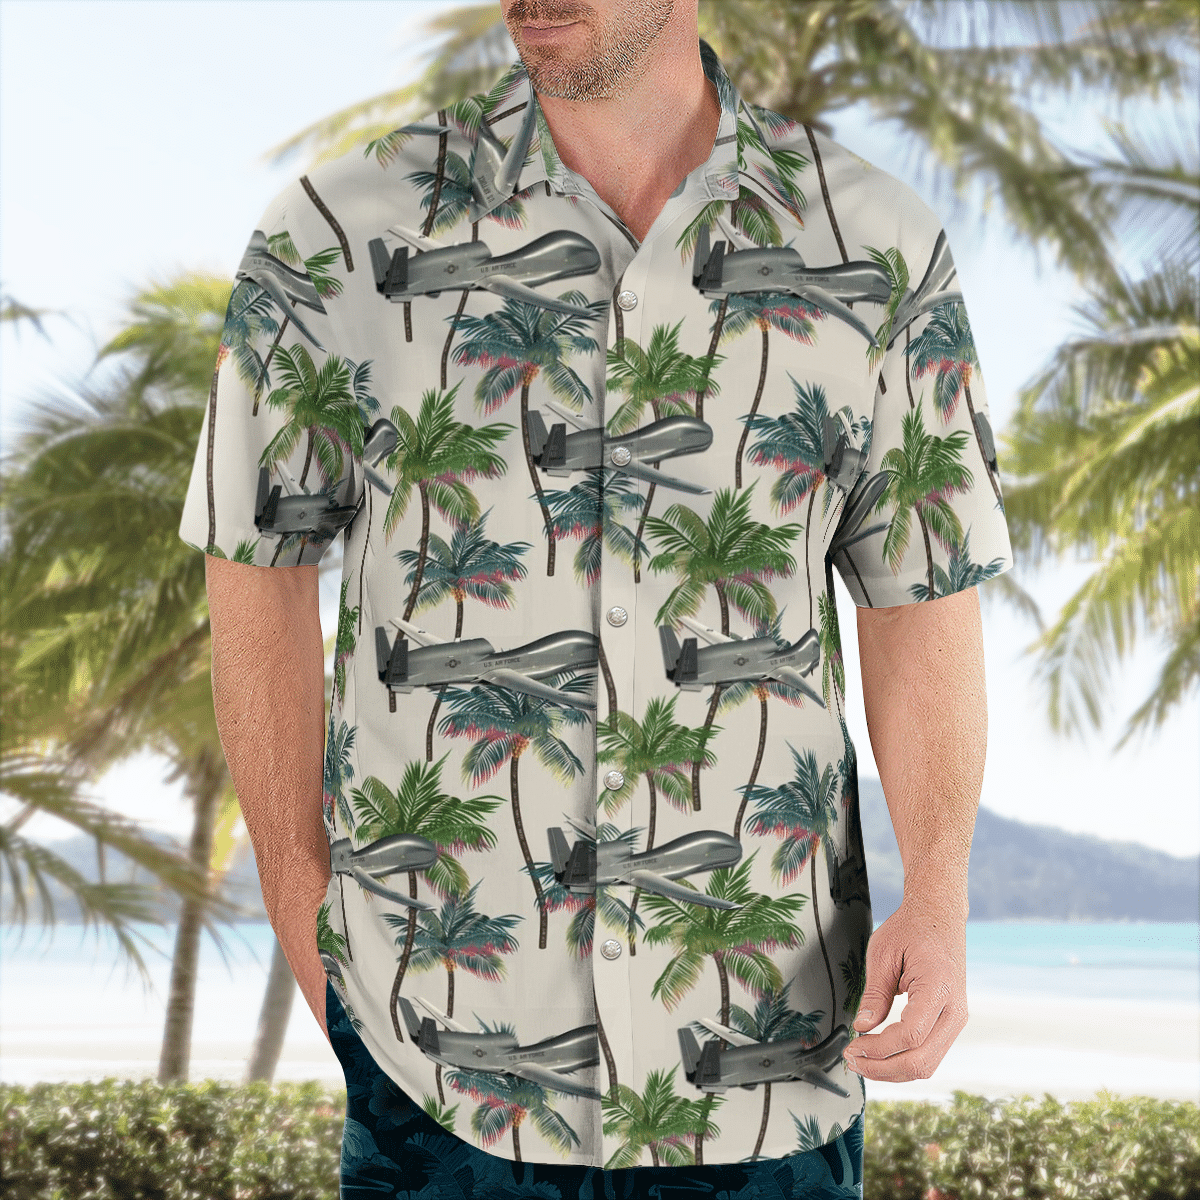 Top Hawaiian fashions that will give you a good look 396